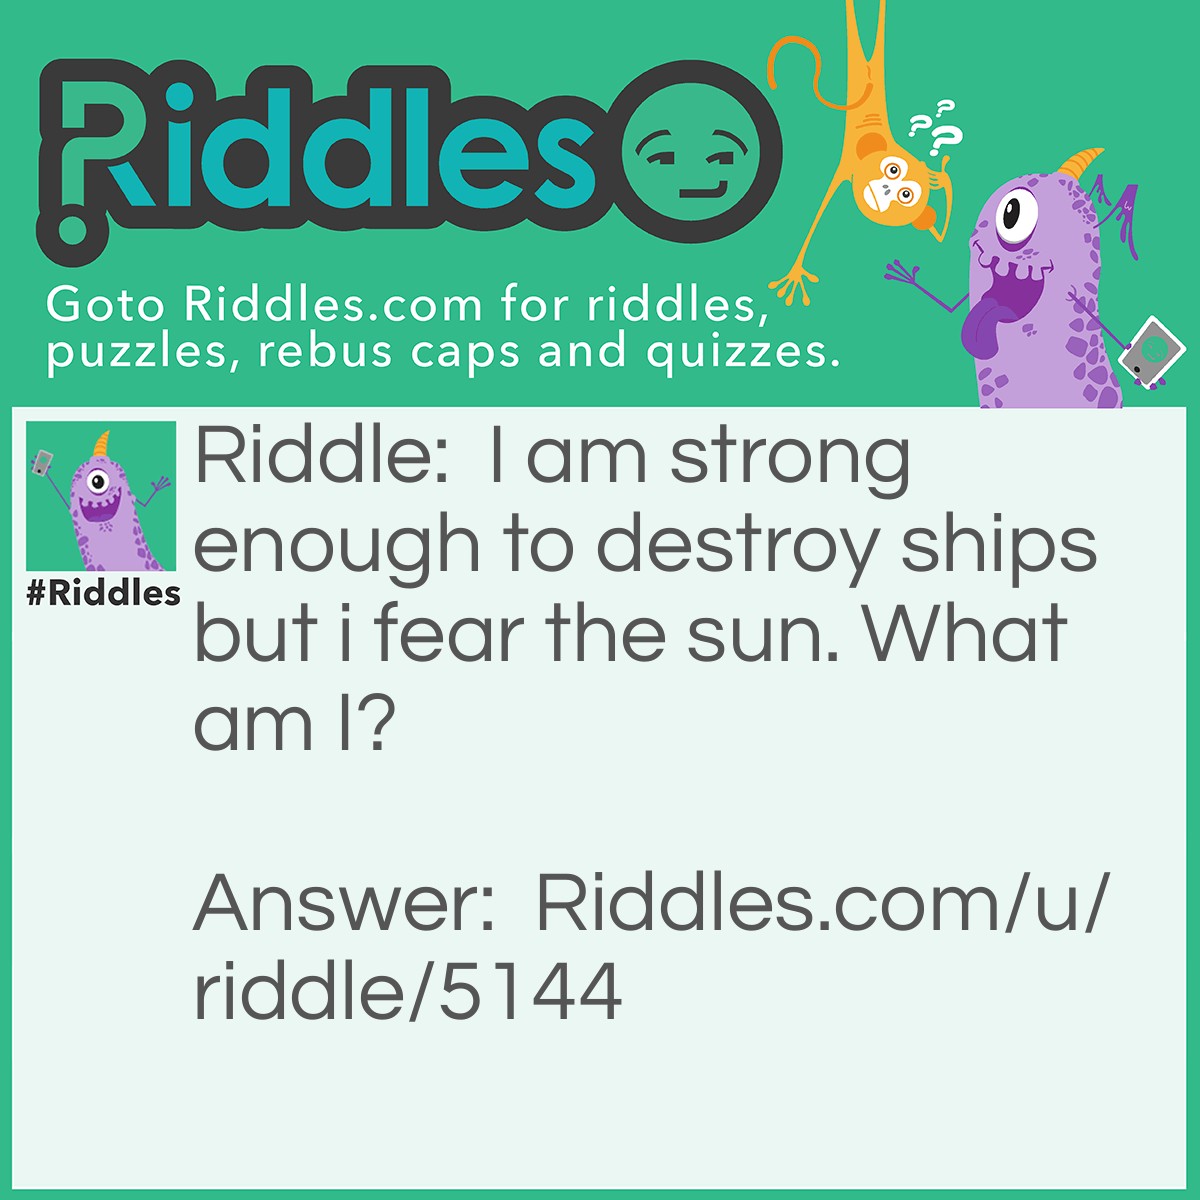 Riddle: I am strong enough to destroy ships but i fear the sun. What am I? Answer: Ice.